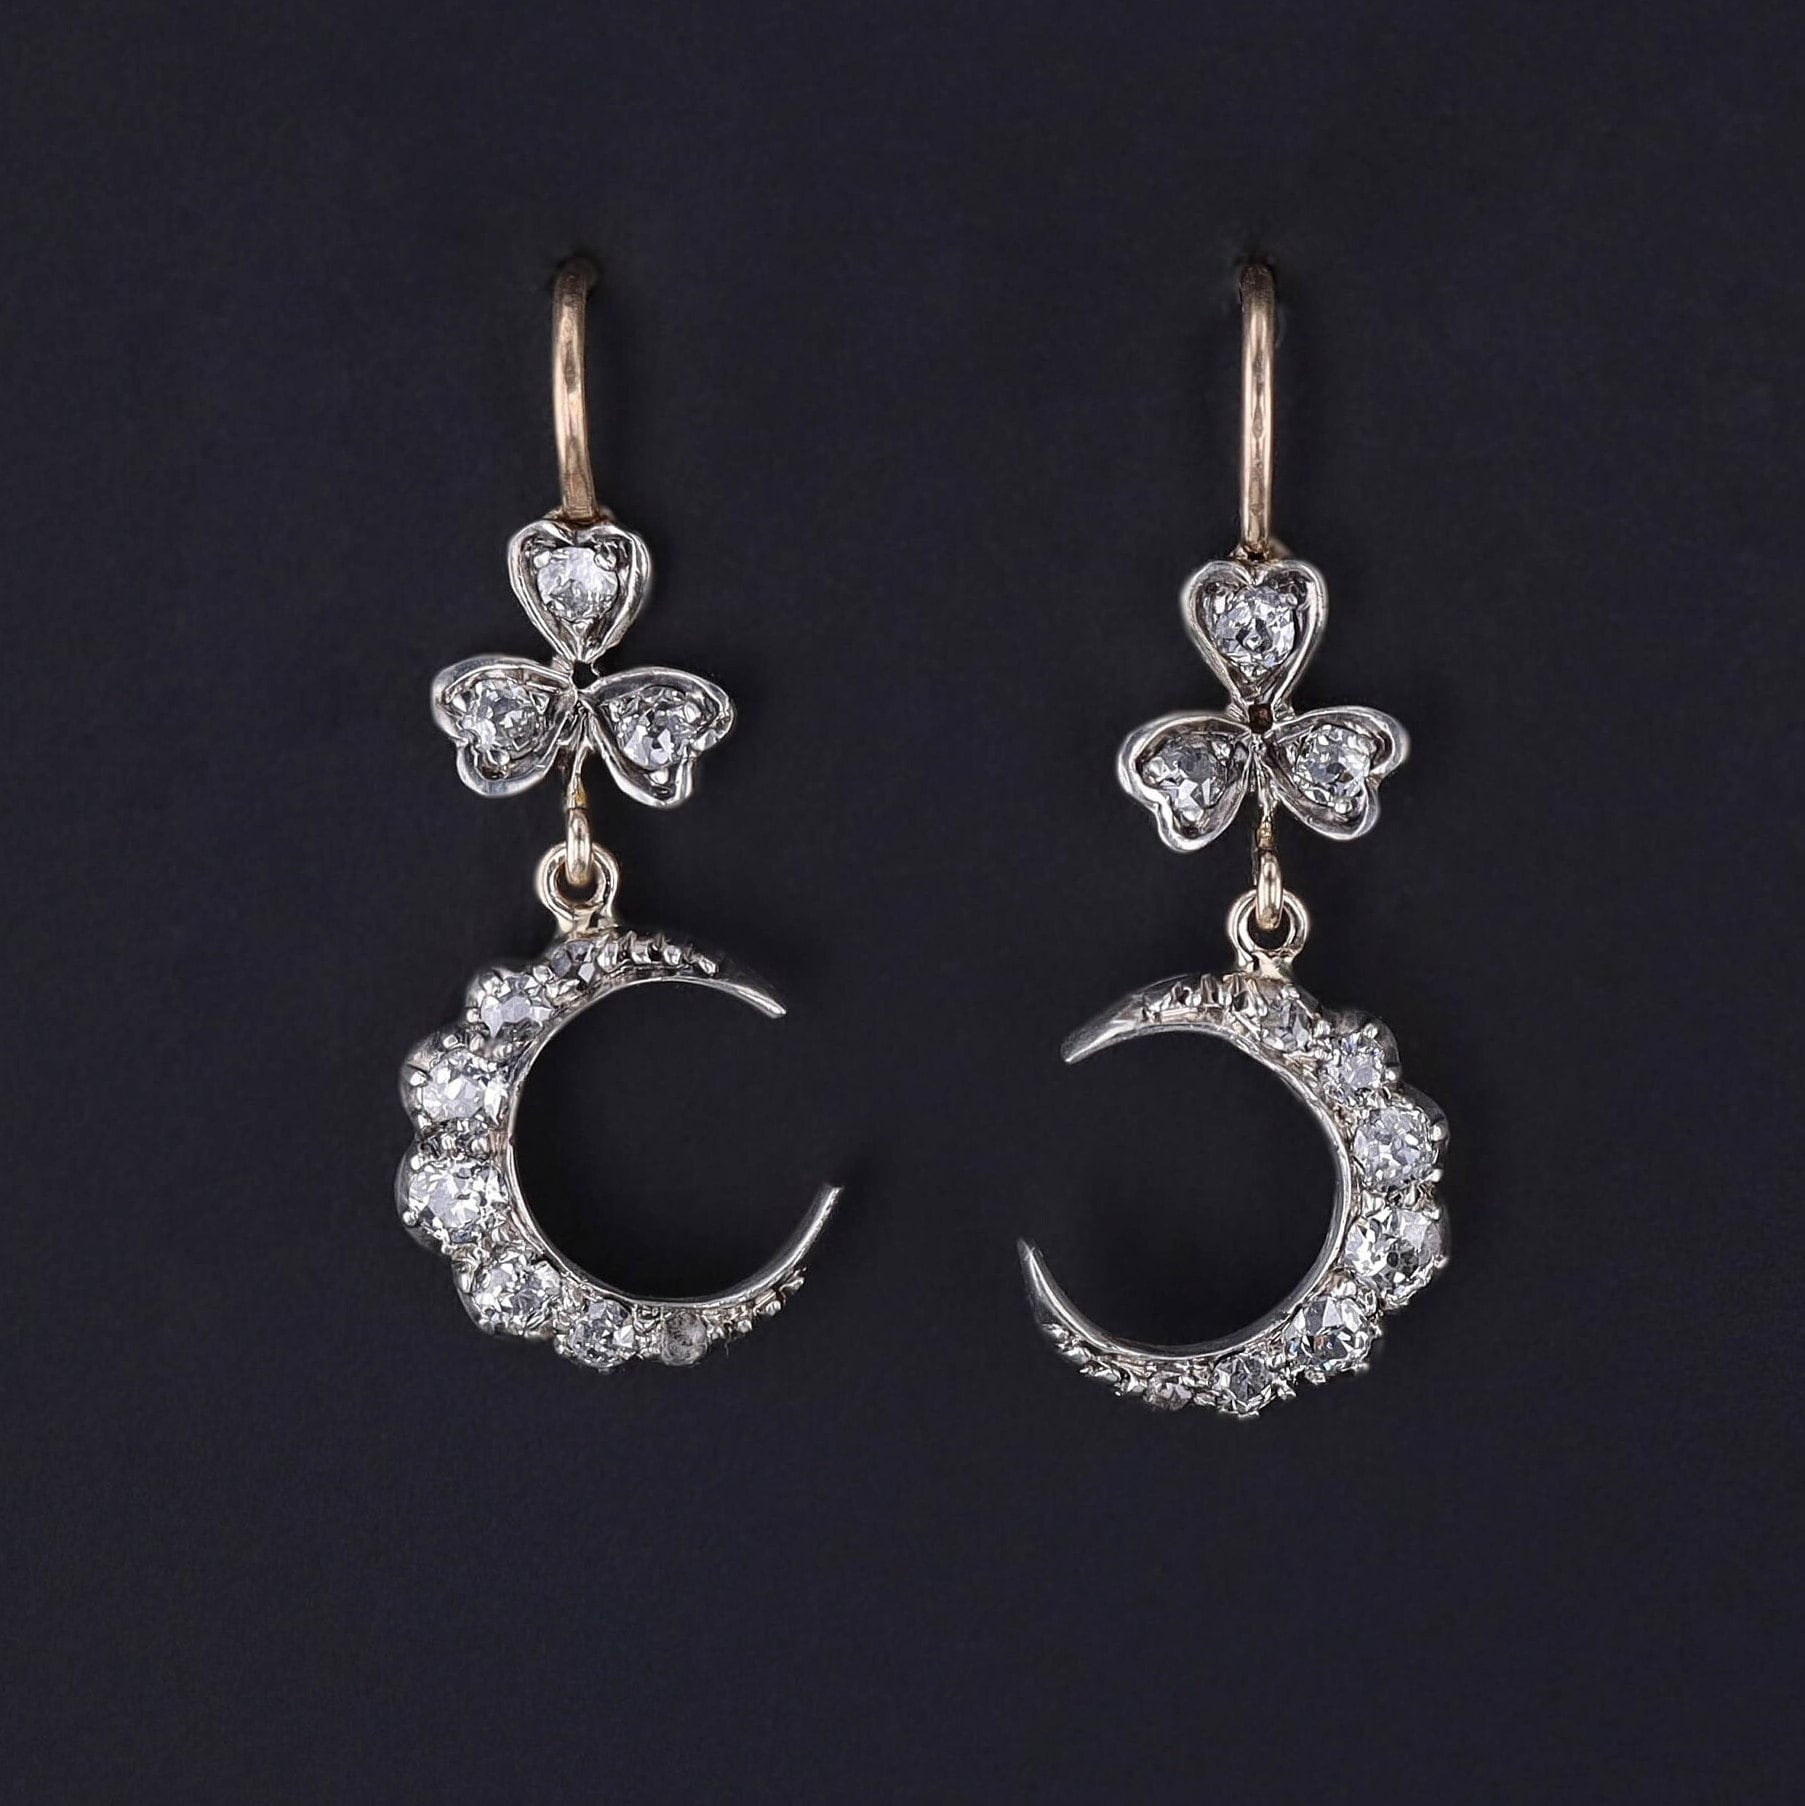 Antique Crescent Earrings of 14k Gold